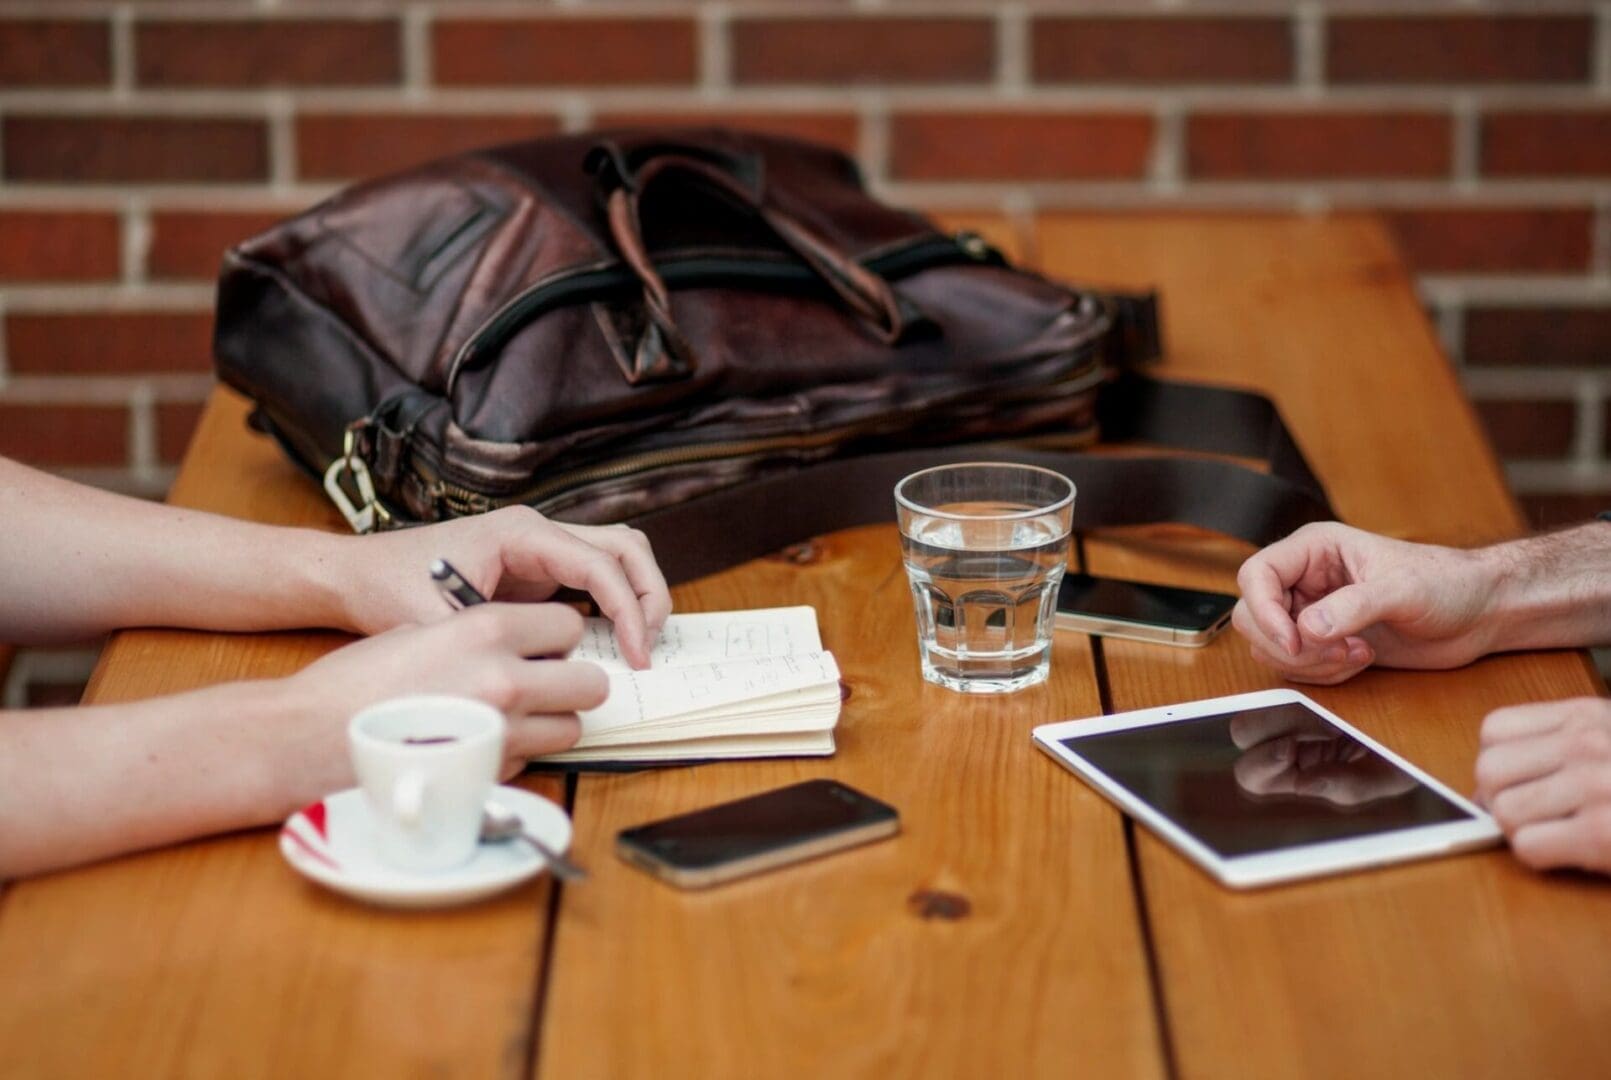 Two people sitting at a wooden table with a cup of coffee, a glass of water, mobile devices, and a leather bag.